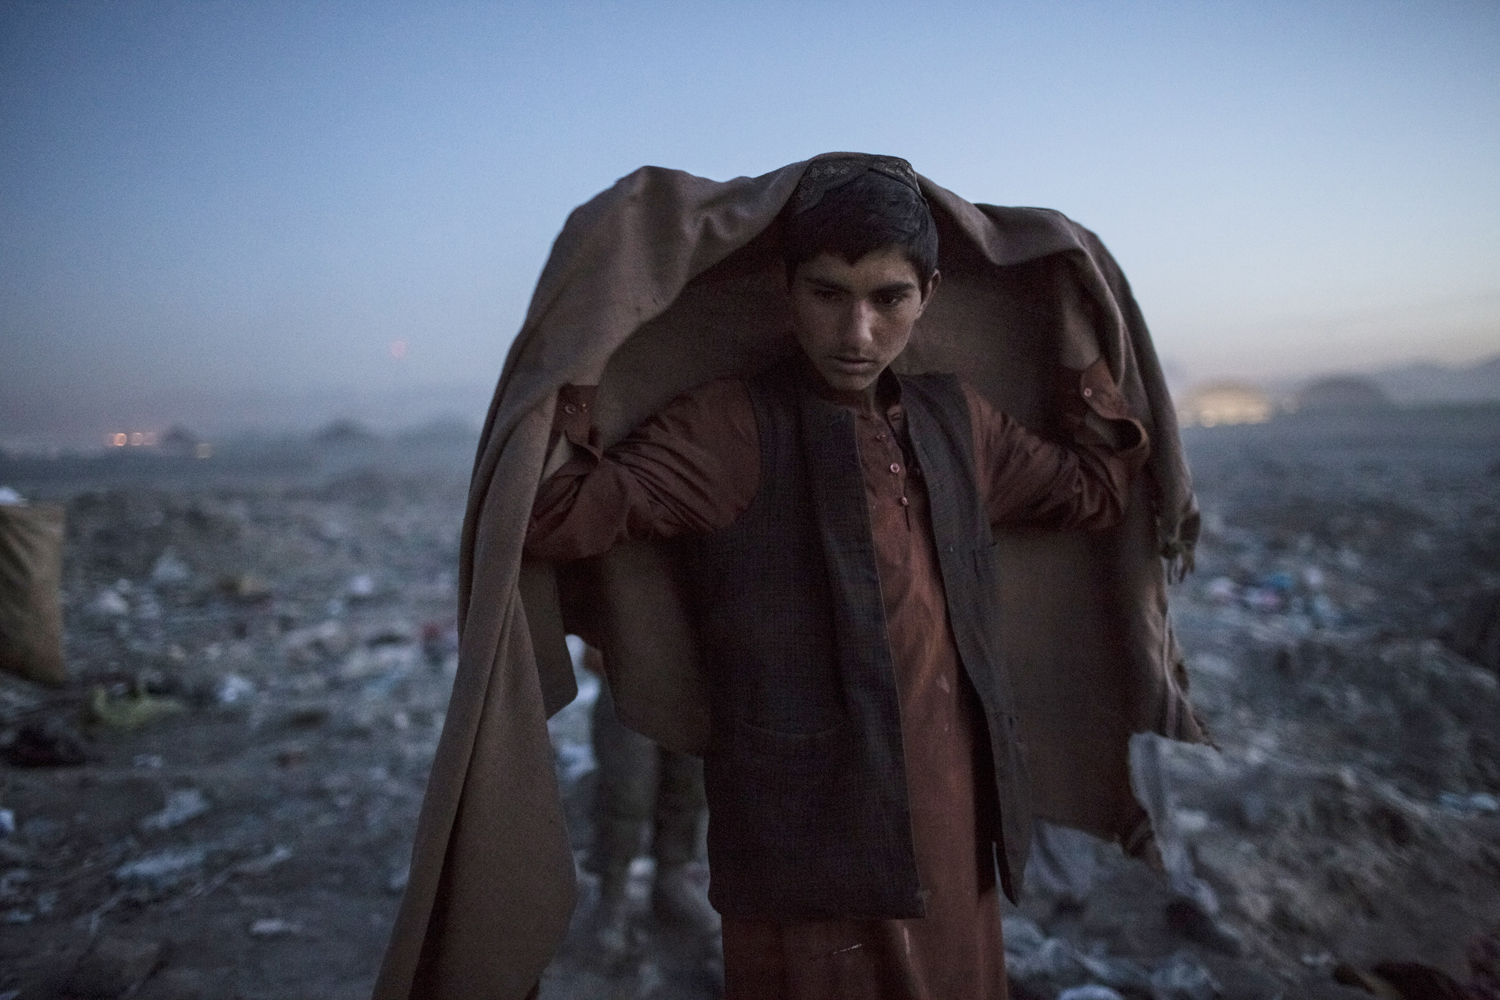 Image: Nov. 14, 2012. An Afghan Pashtun boy, who said he was forced from the troubled province of Baglan due to threats from the Taliban, winds up his day after scavenging for recyclables at a garbage dump site in Kabul.